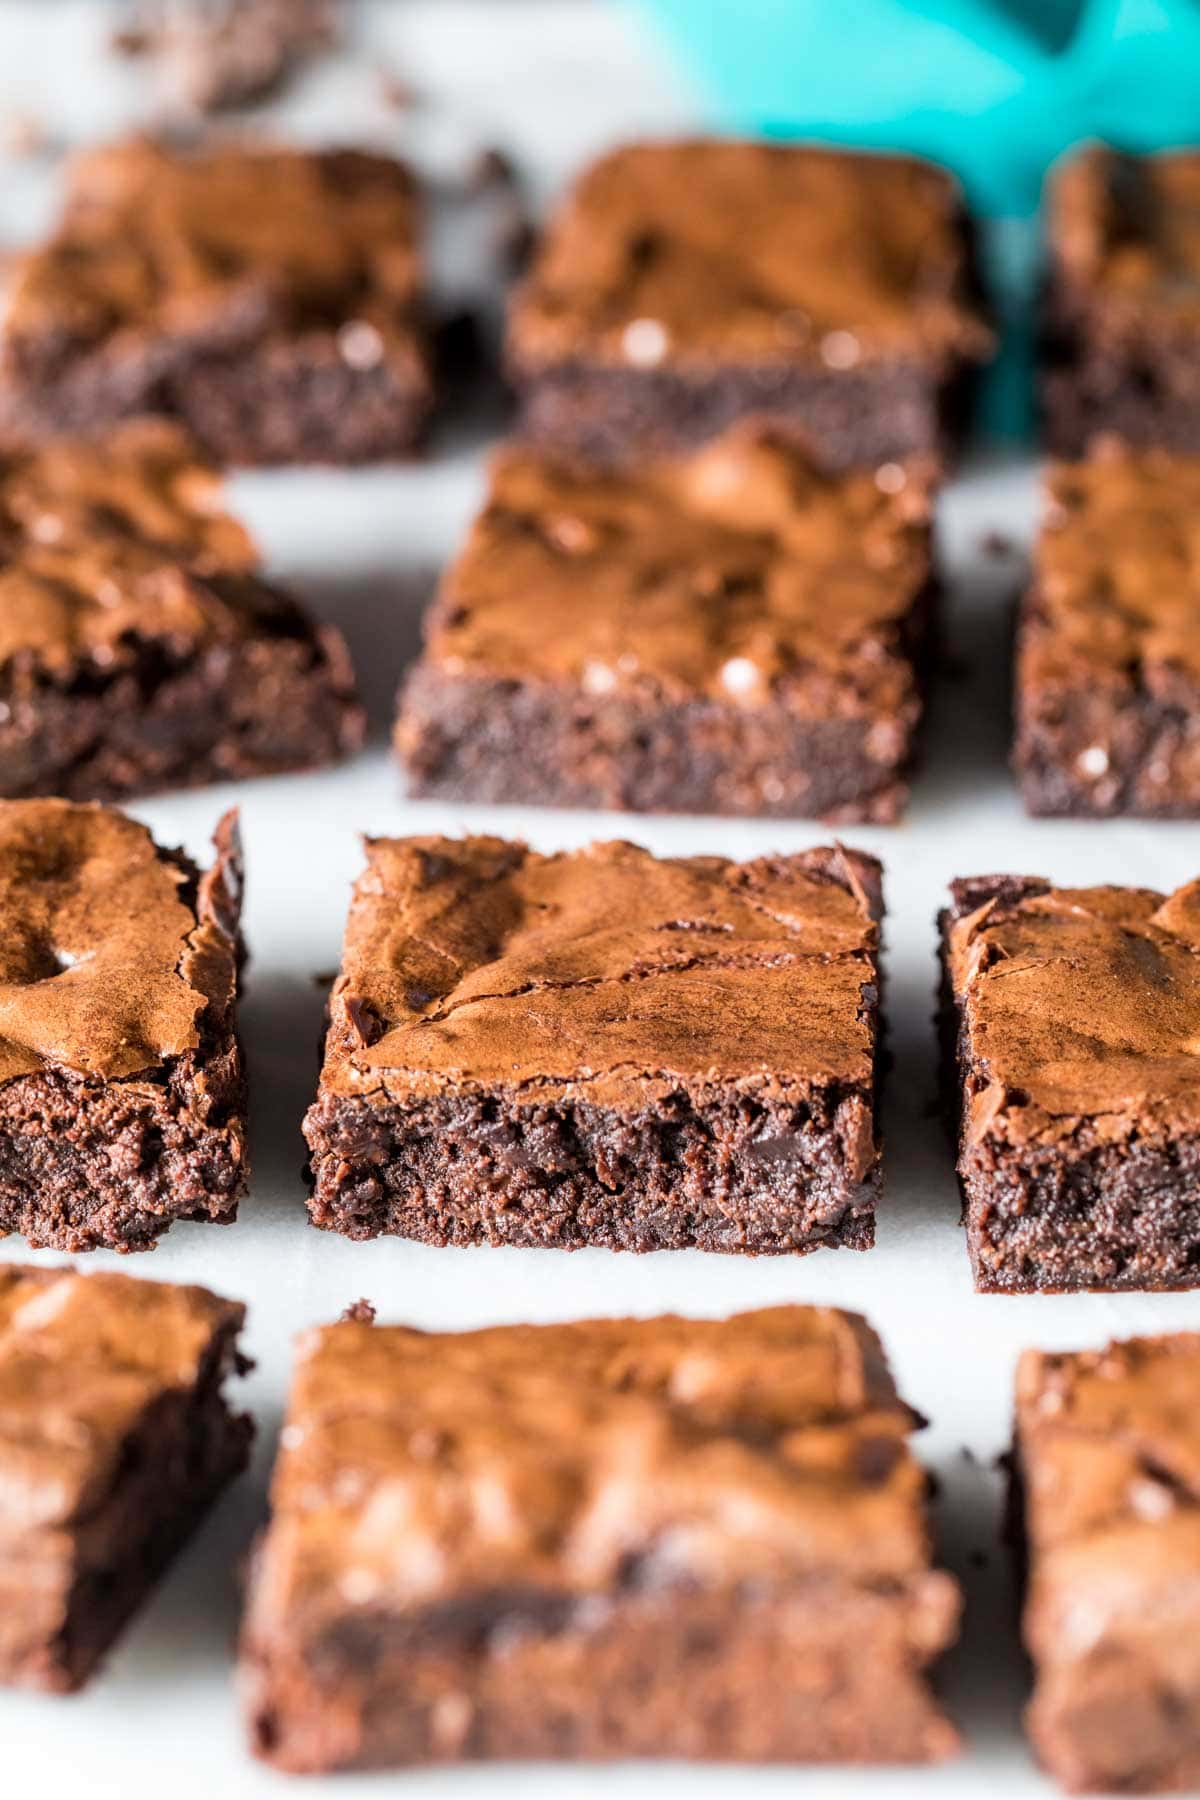 Rows of perfectly square brownies on a white surface.